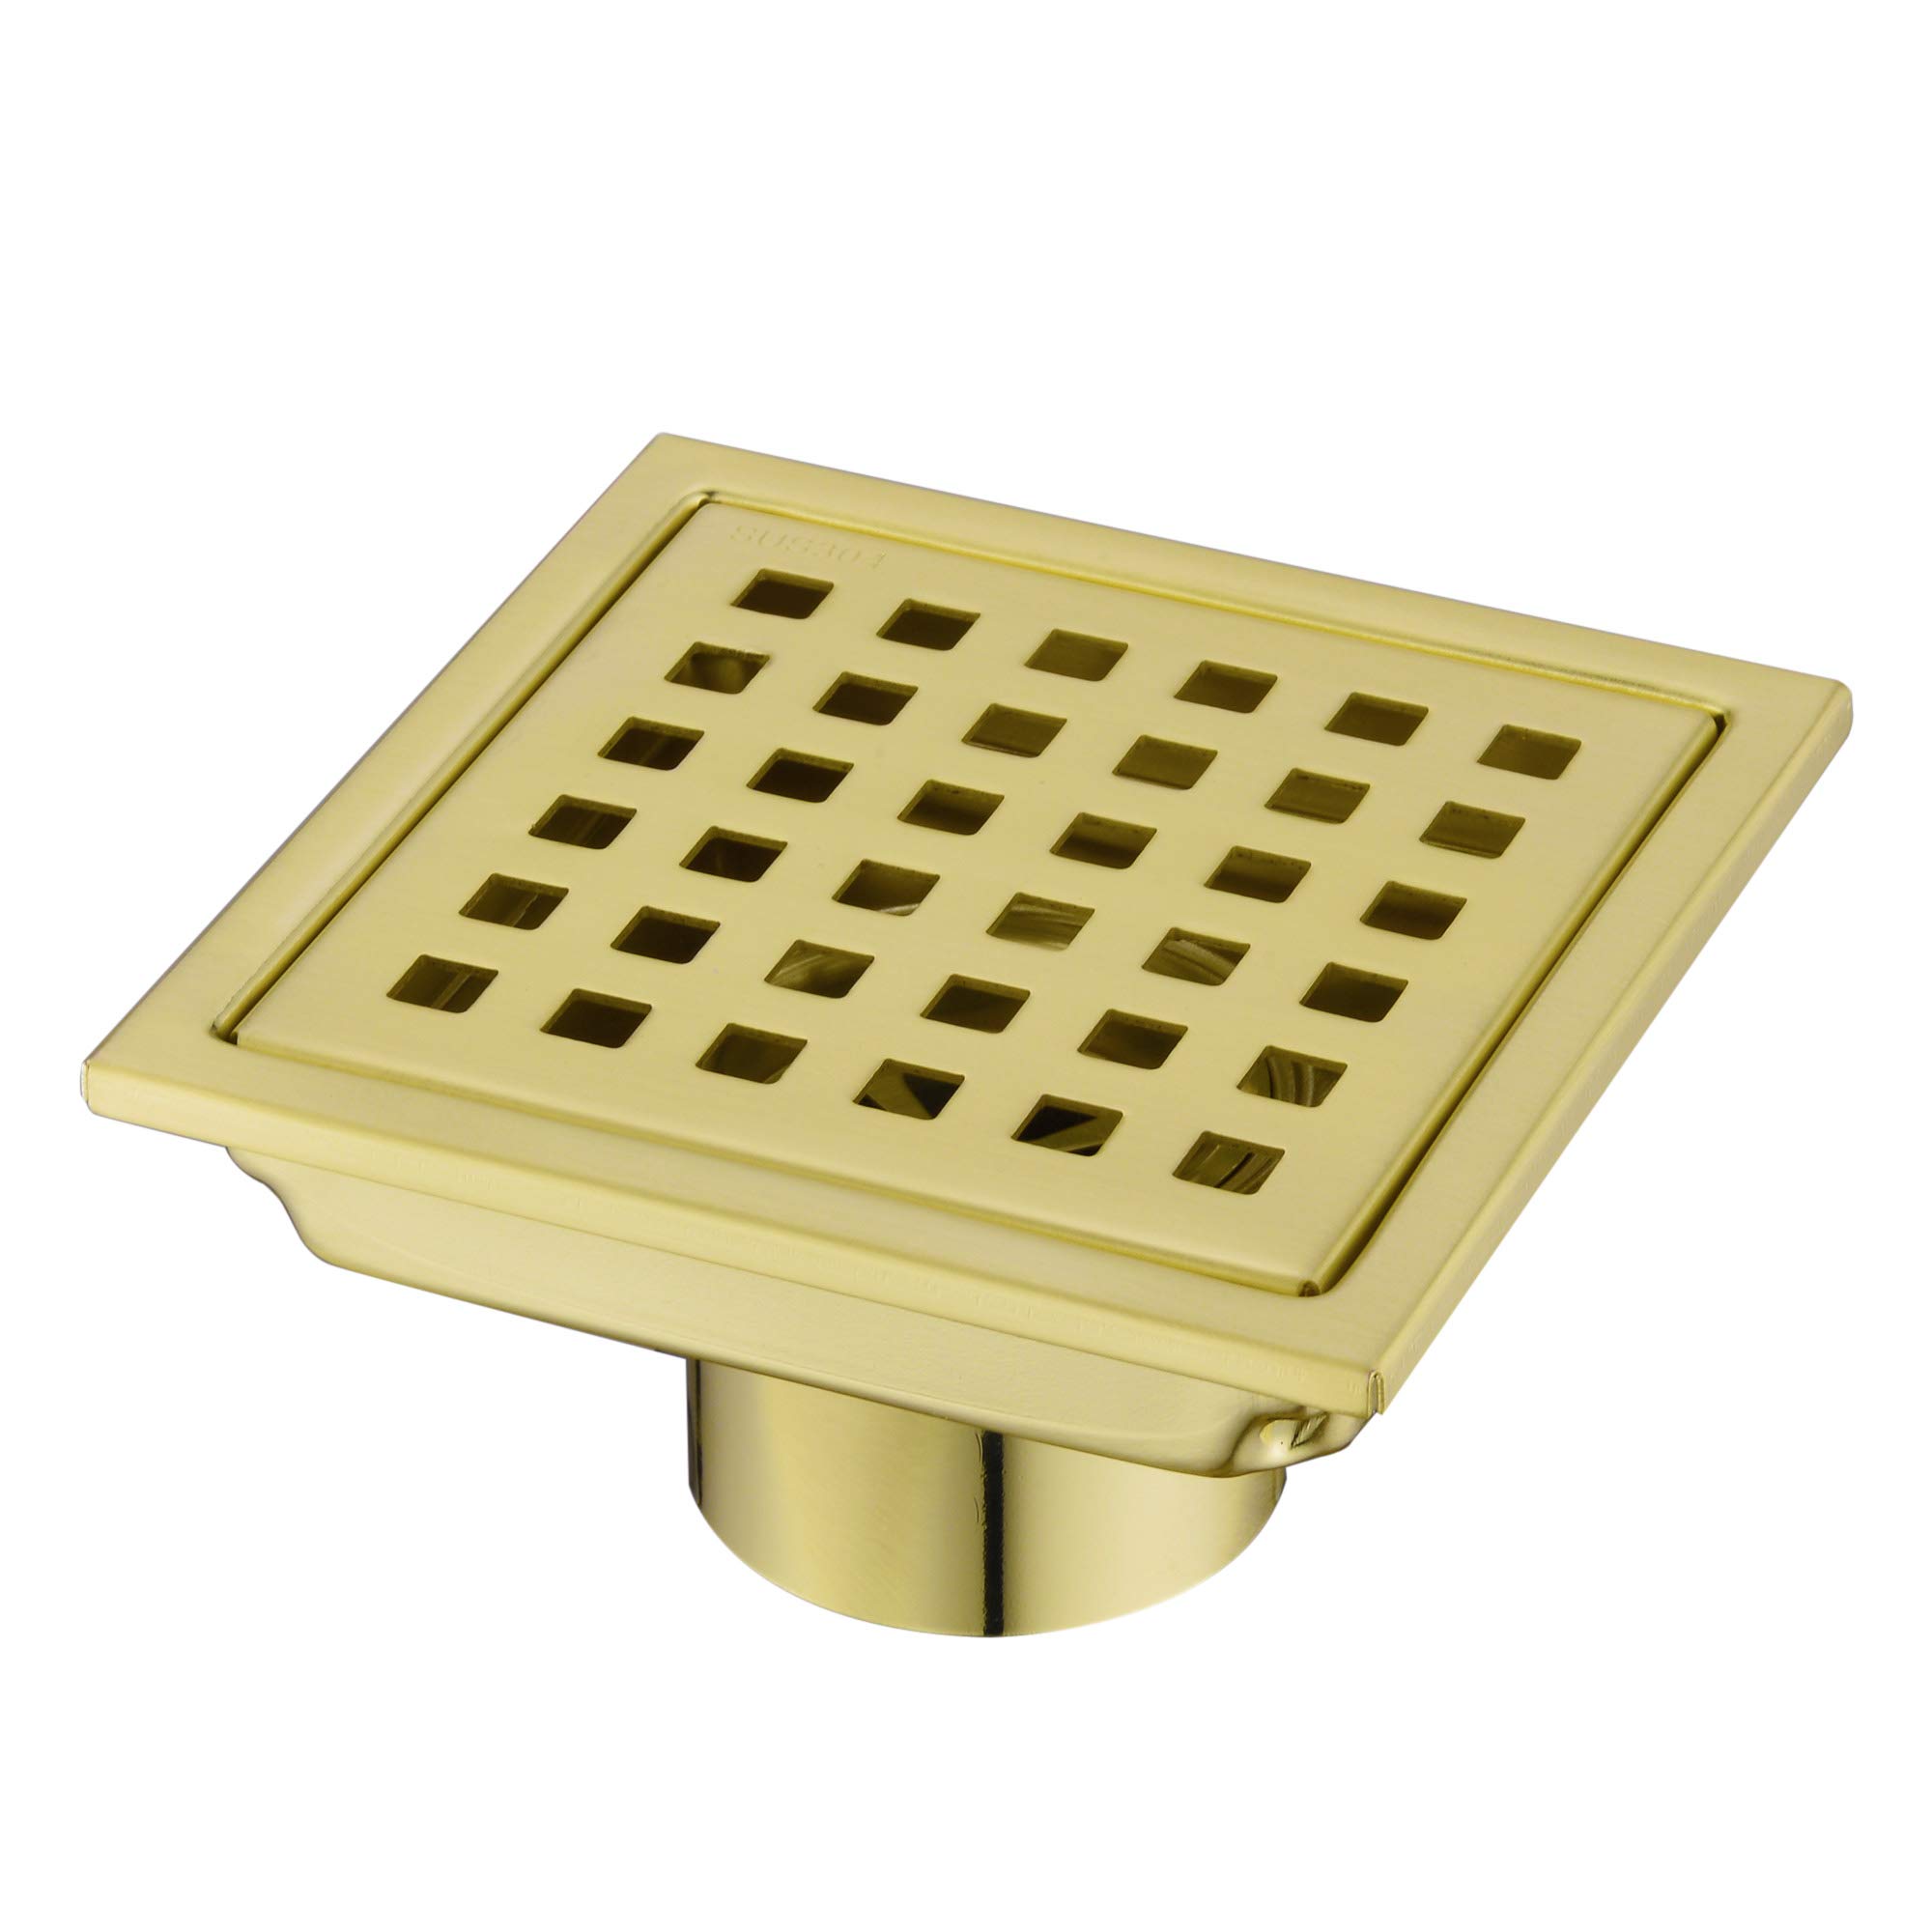 Orhemus 4 Inch Square Shower Drain with Adjustable Shower Drain Base Flange, SUS 304 Stainless Steel Floor Drain with Removable Cover Grid Grate, Brushed Gold Brass Finished